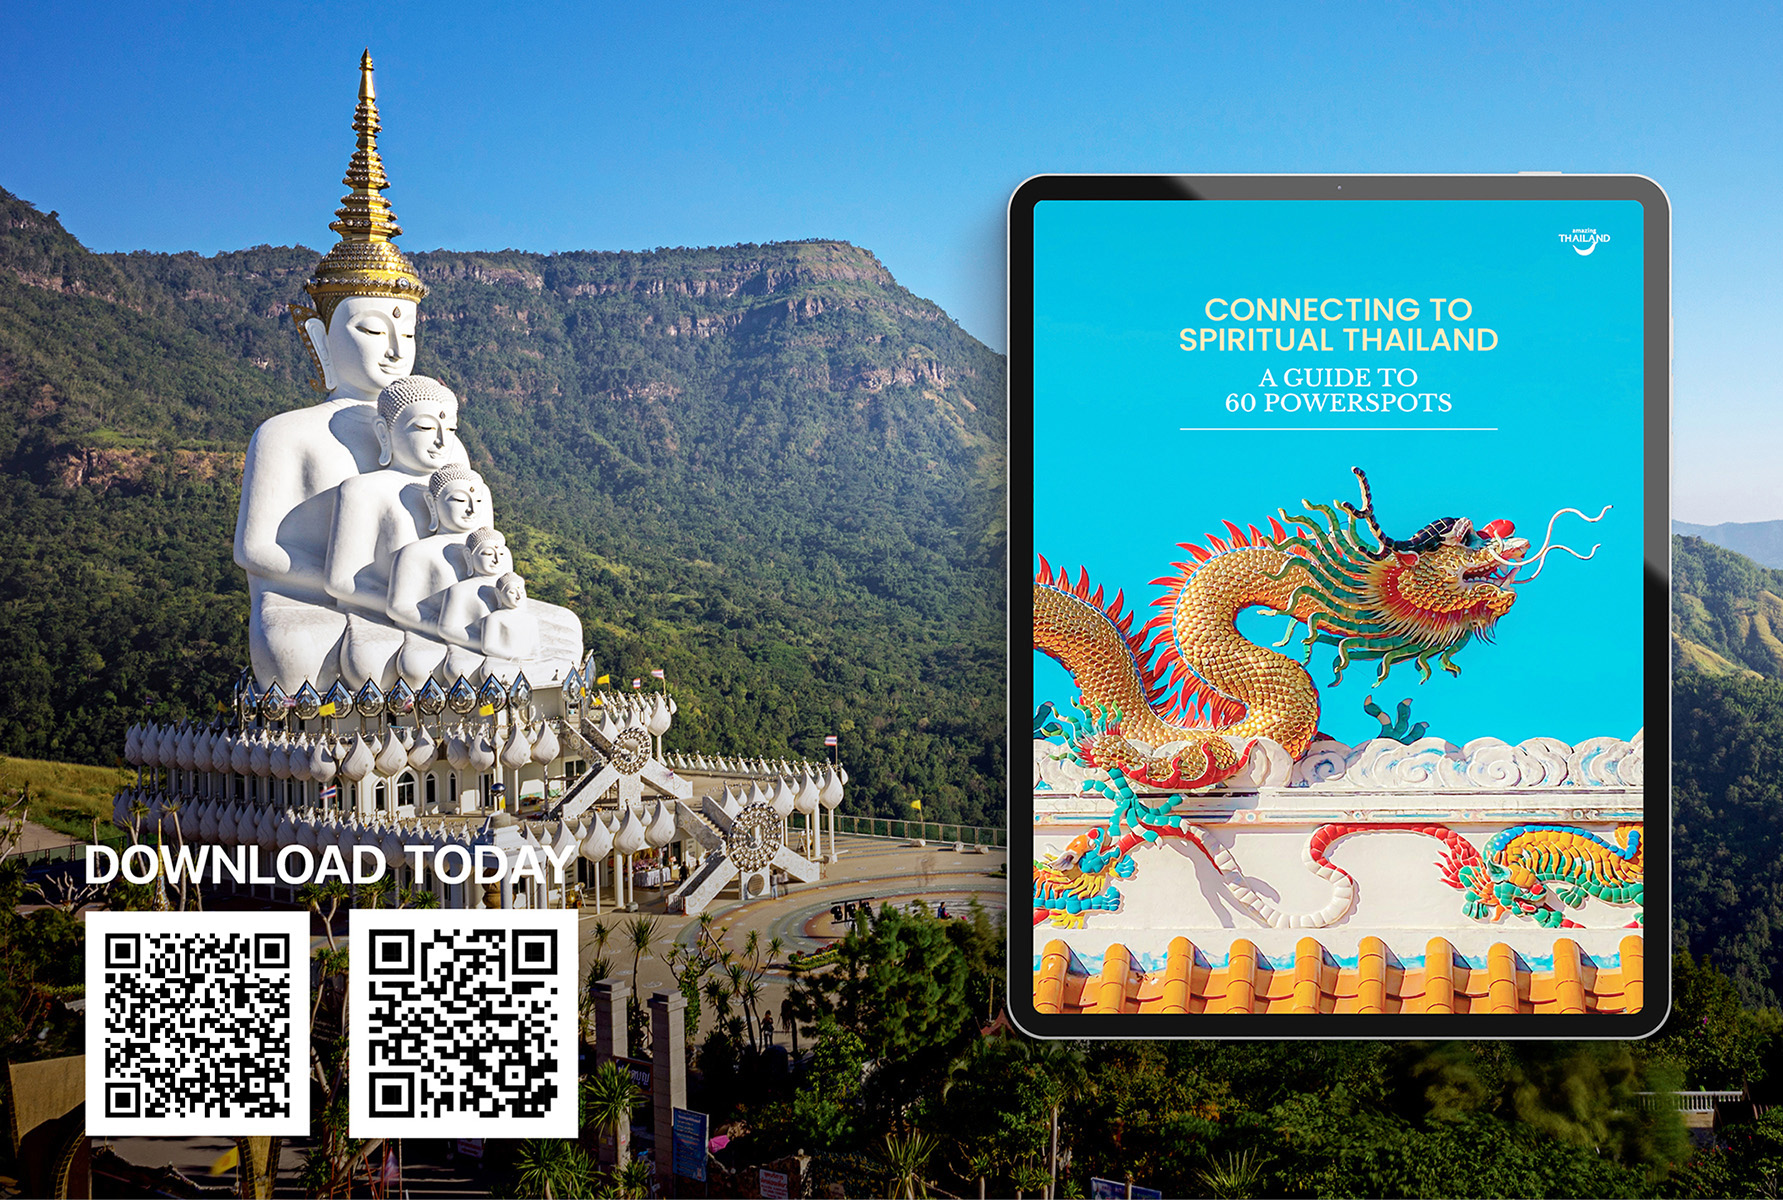 TAT  sponsors the e-book “Connecting to Spiritual Thailand: A Guide to 60 Powerspots”